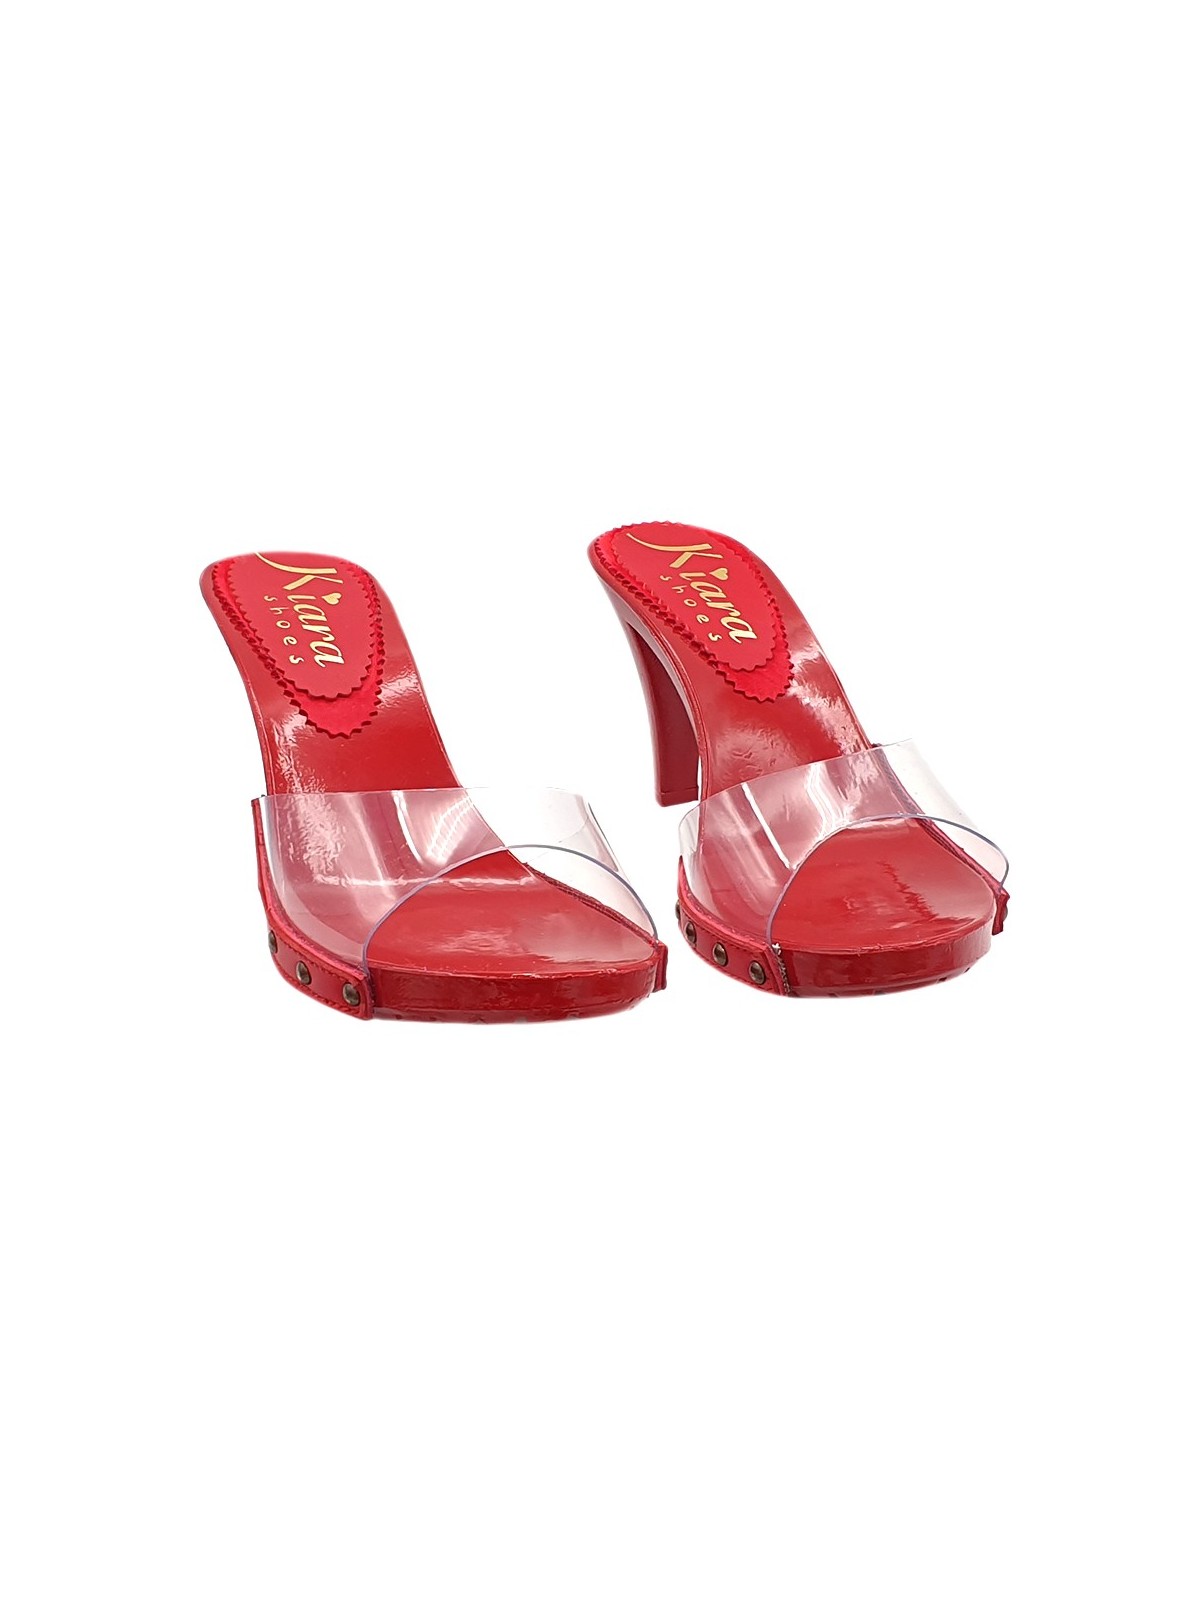 RED CLOGS WITH TRANSPARENT UPPER HEEL 9 CM